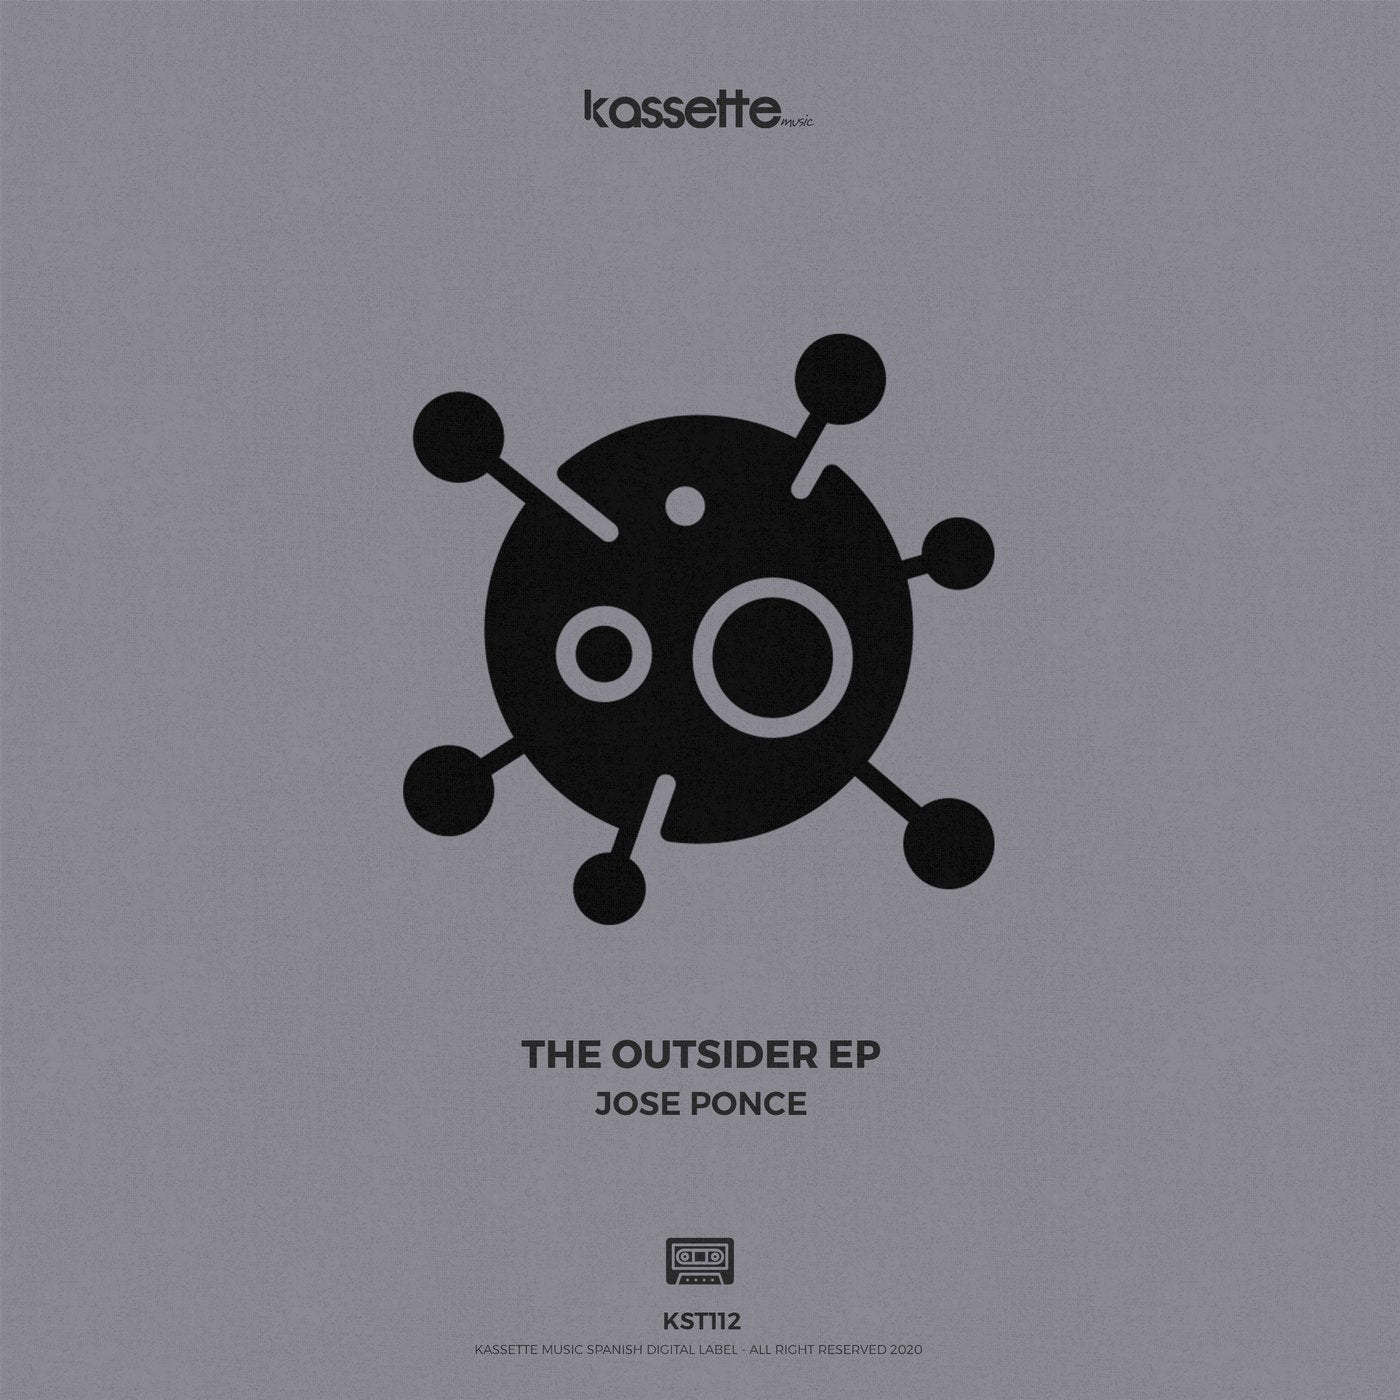 The Outsider EP